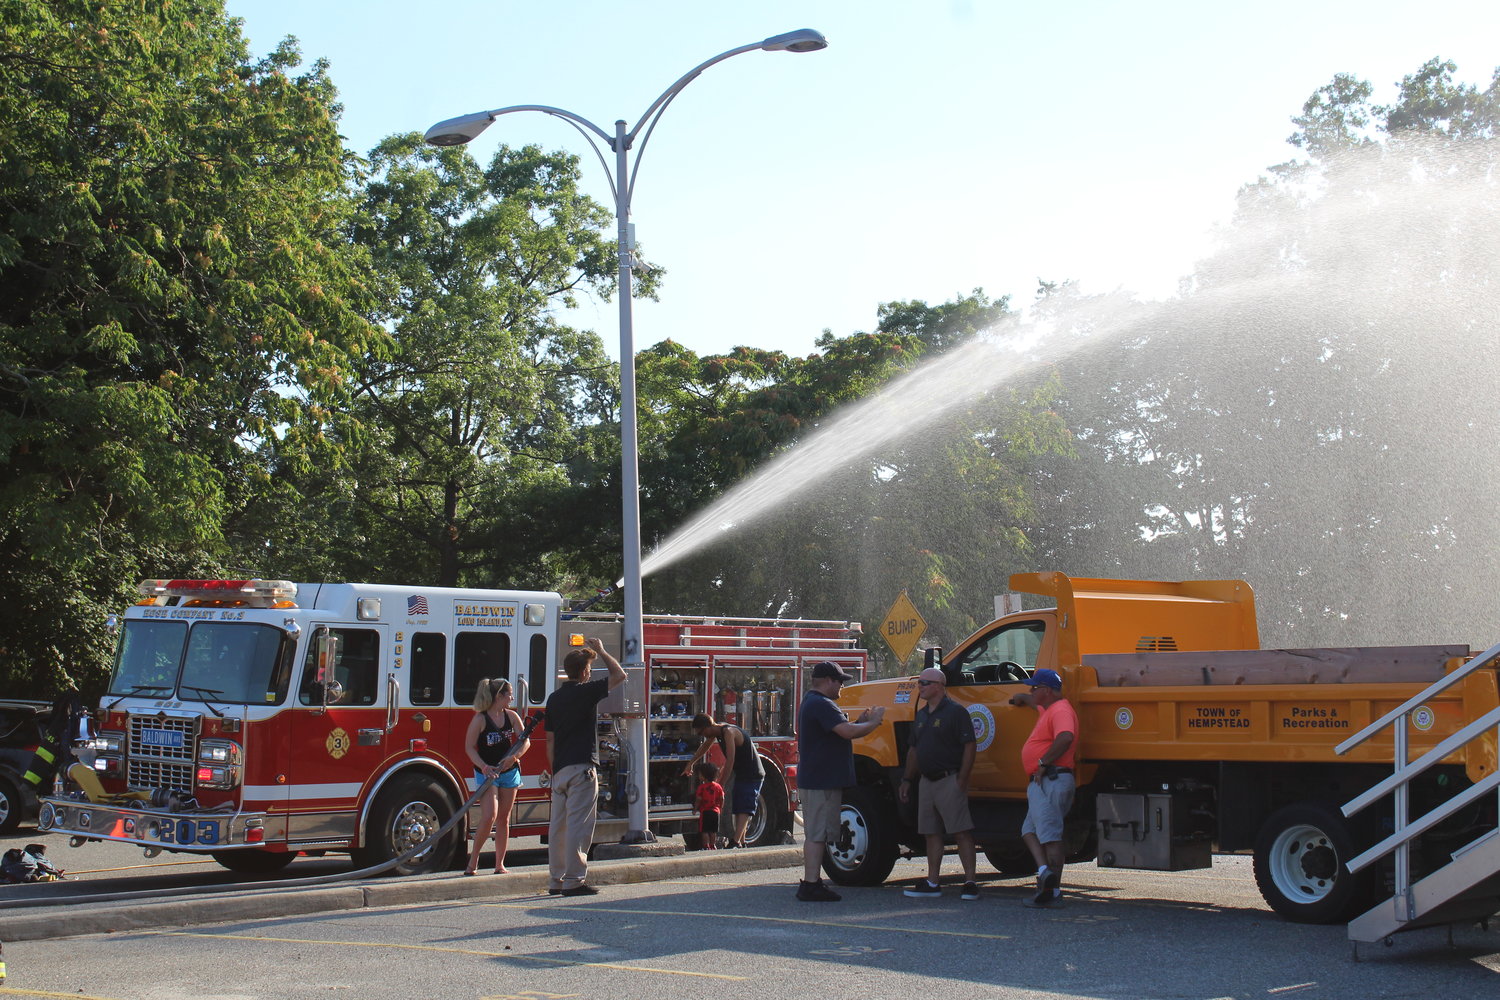 The Baldwin Fire Department cooled down National Night Out-goers while teaching them about the mechanics of operating a fire truck and offering passersby the opportunity to try out the hose.